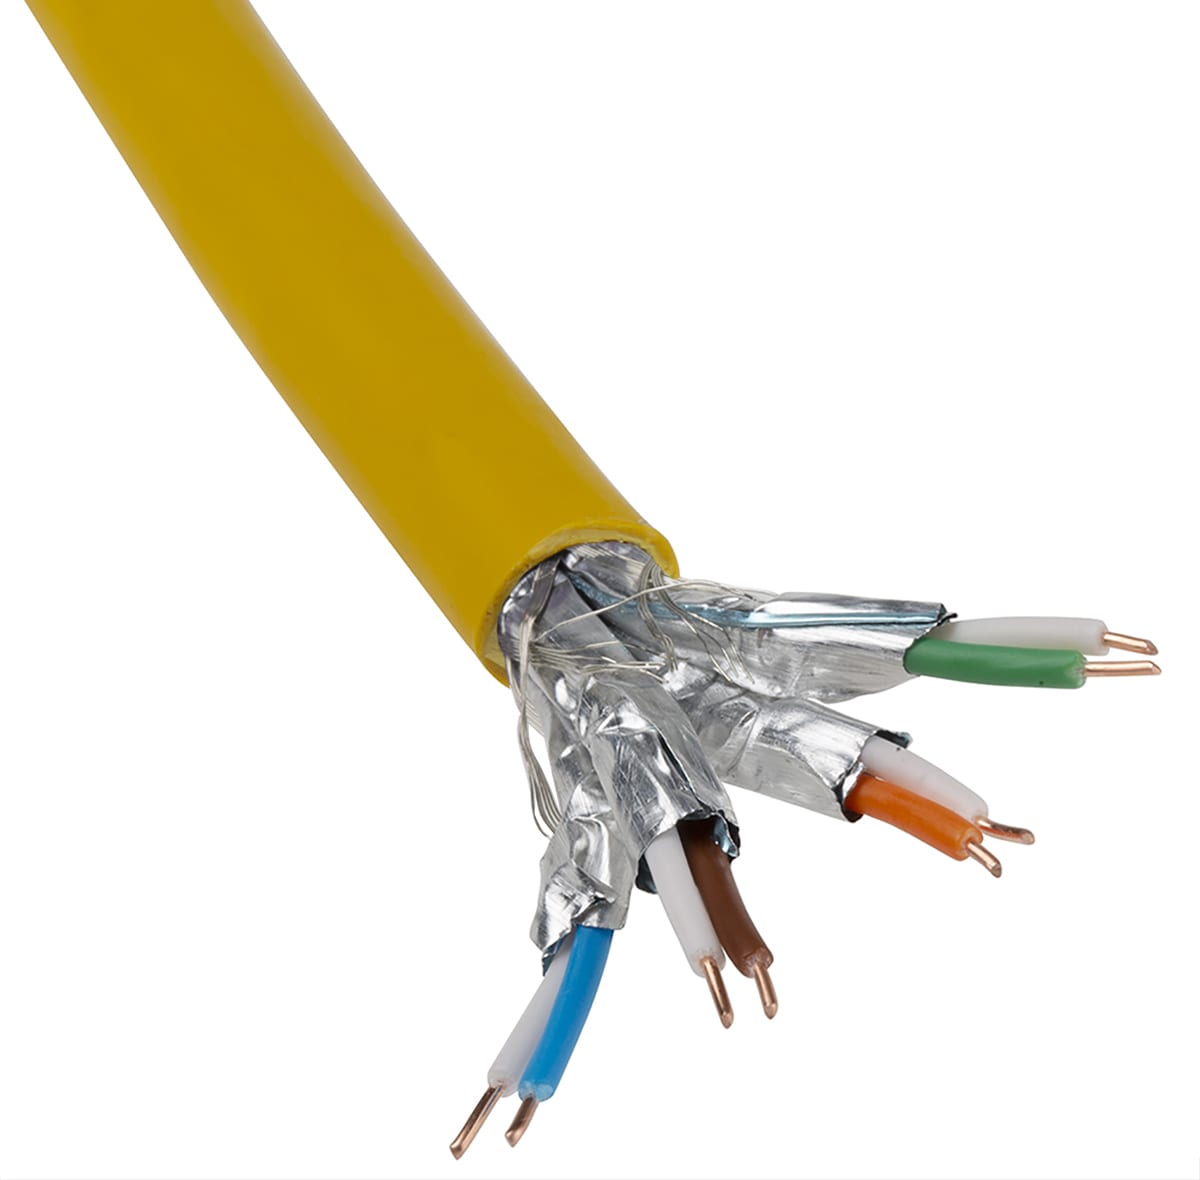 Cat7 Ethernet Cable: Everything You Need To Know